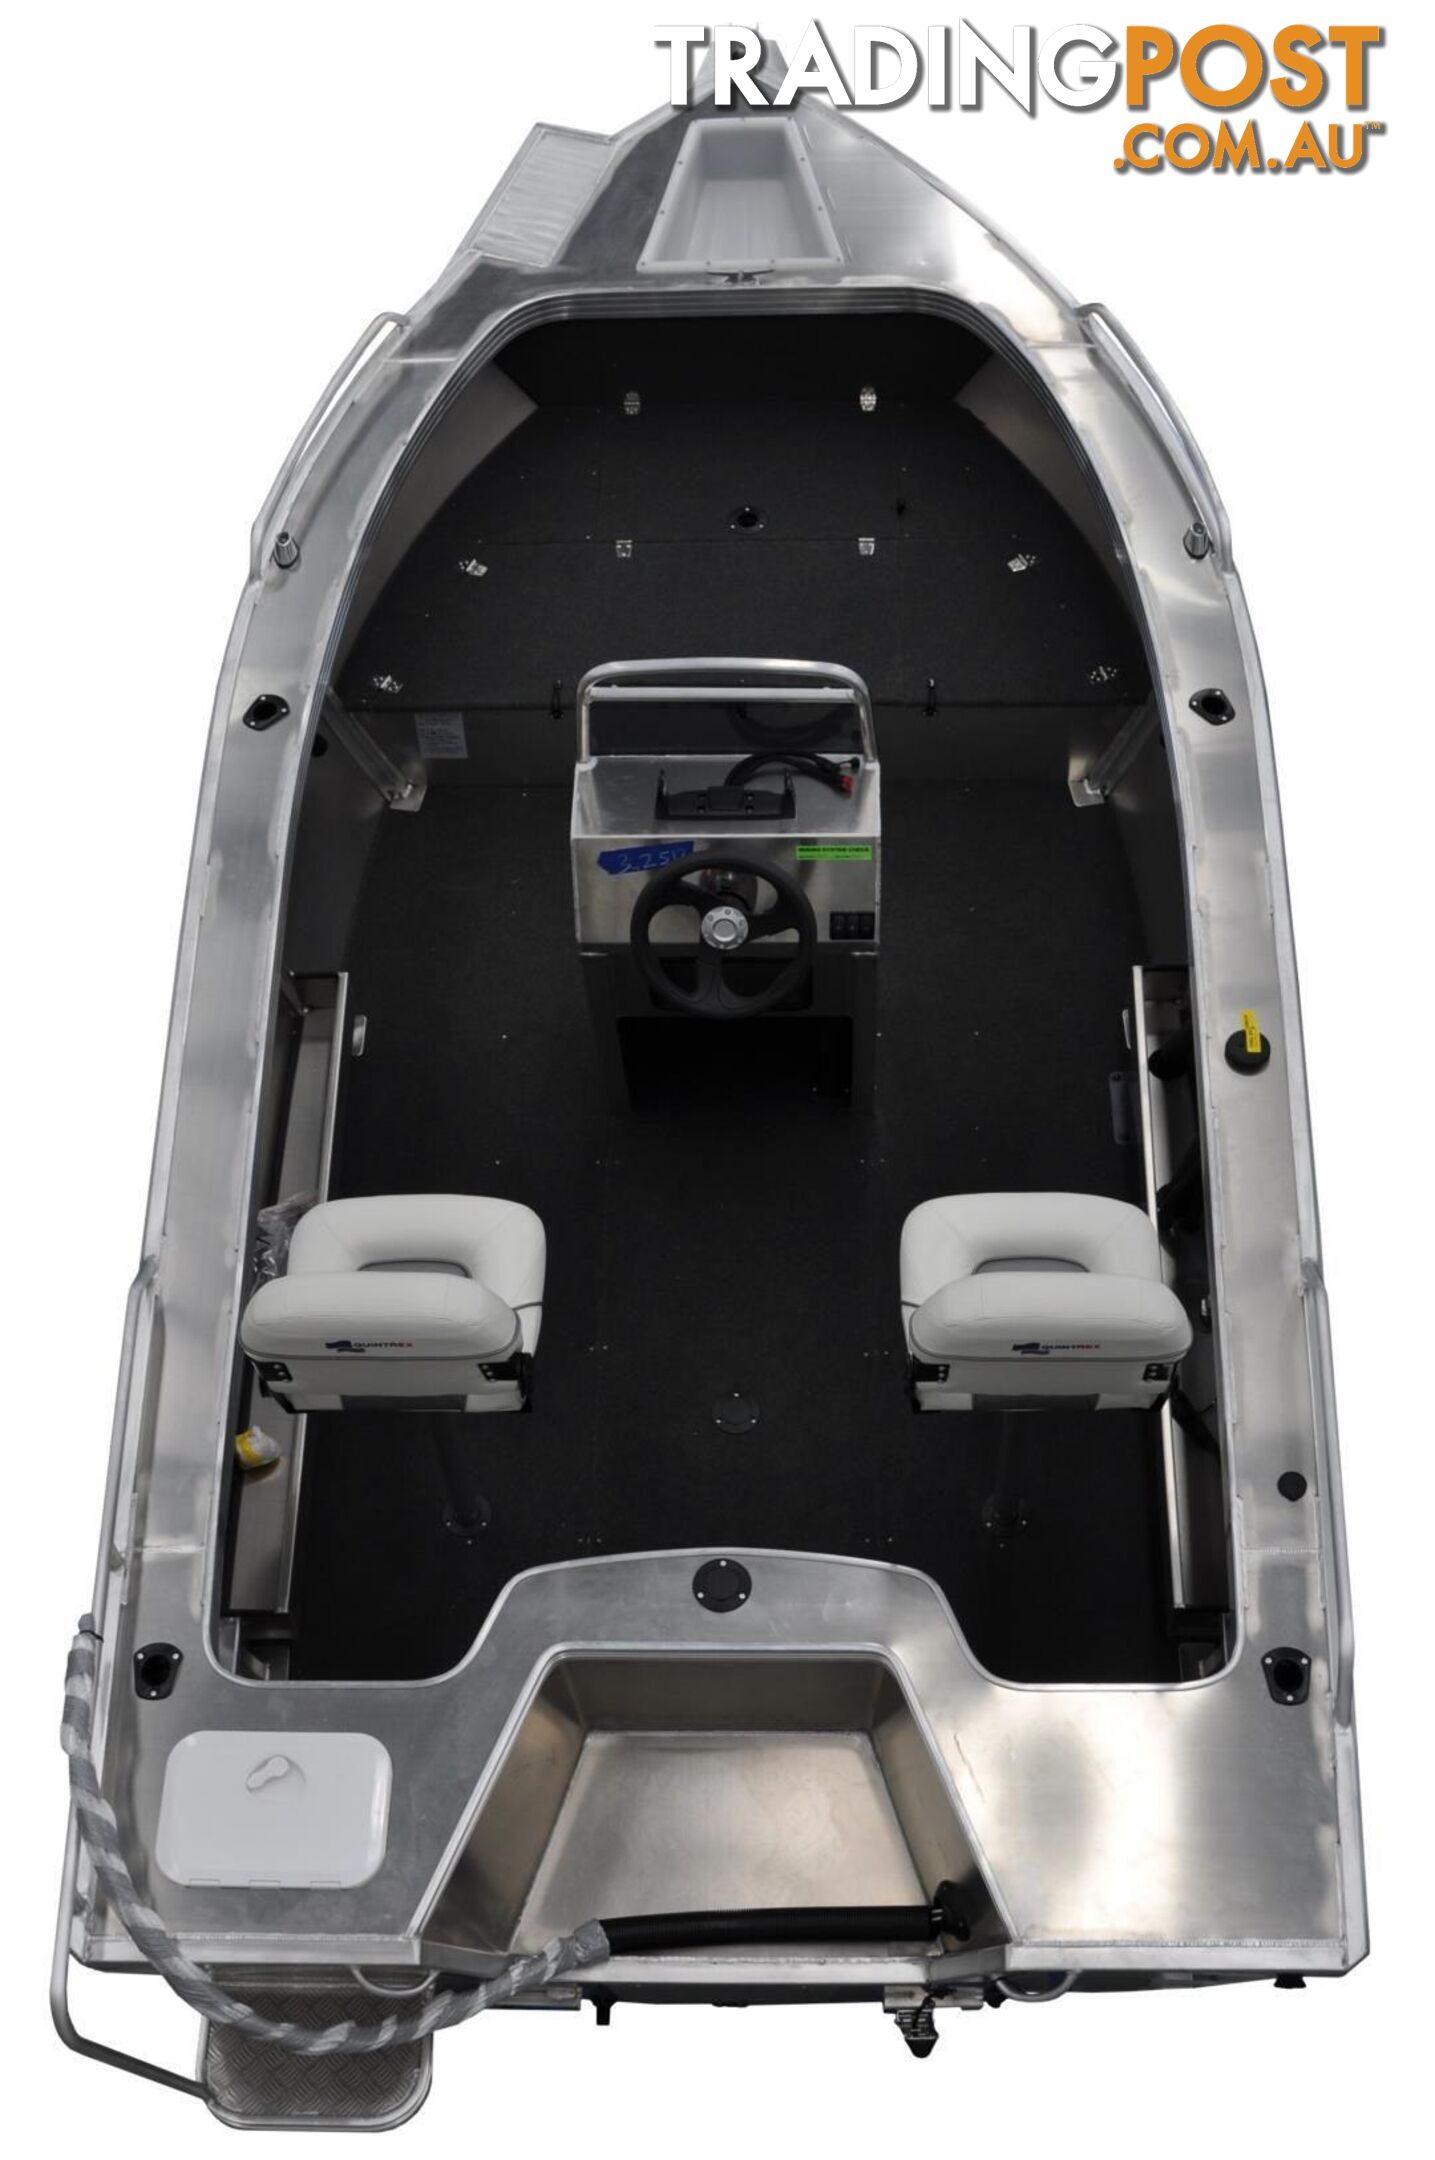 Quintrex 490 Renegade CC(Centre Console) + Yamaha F75hp 4-Stroke - Pack 2 for sale online prices